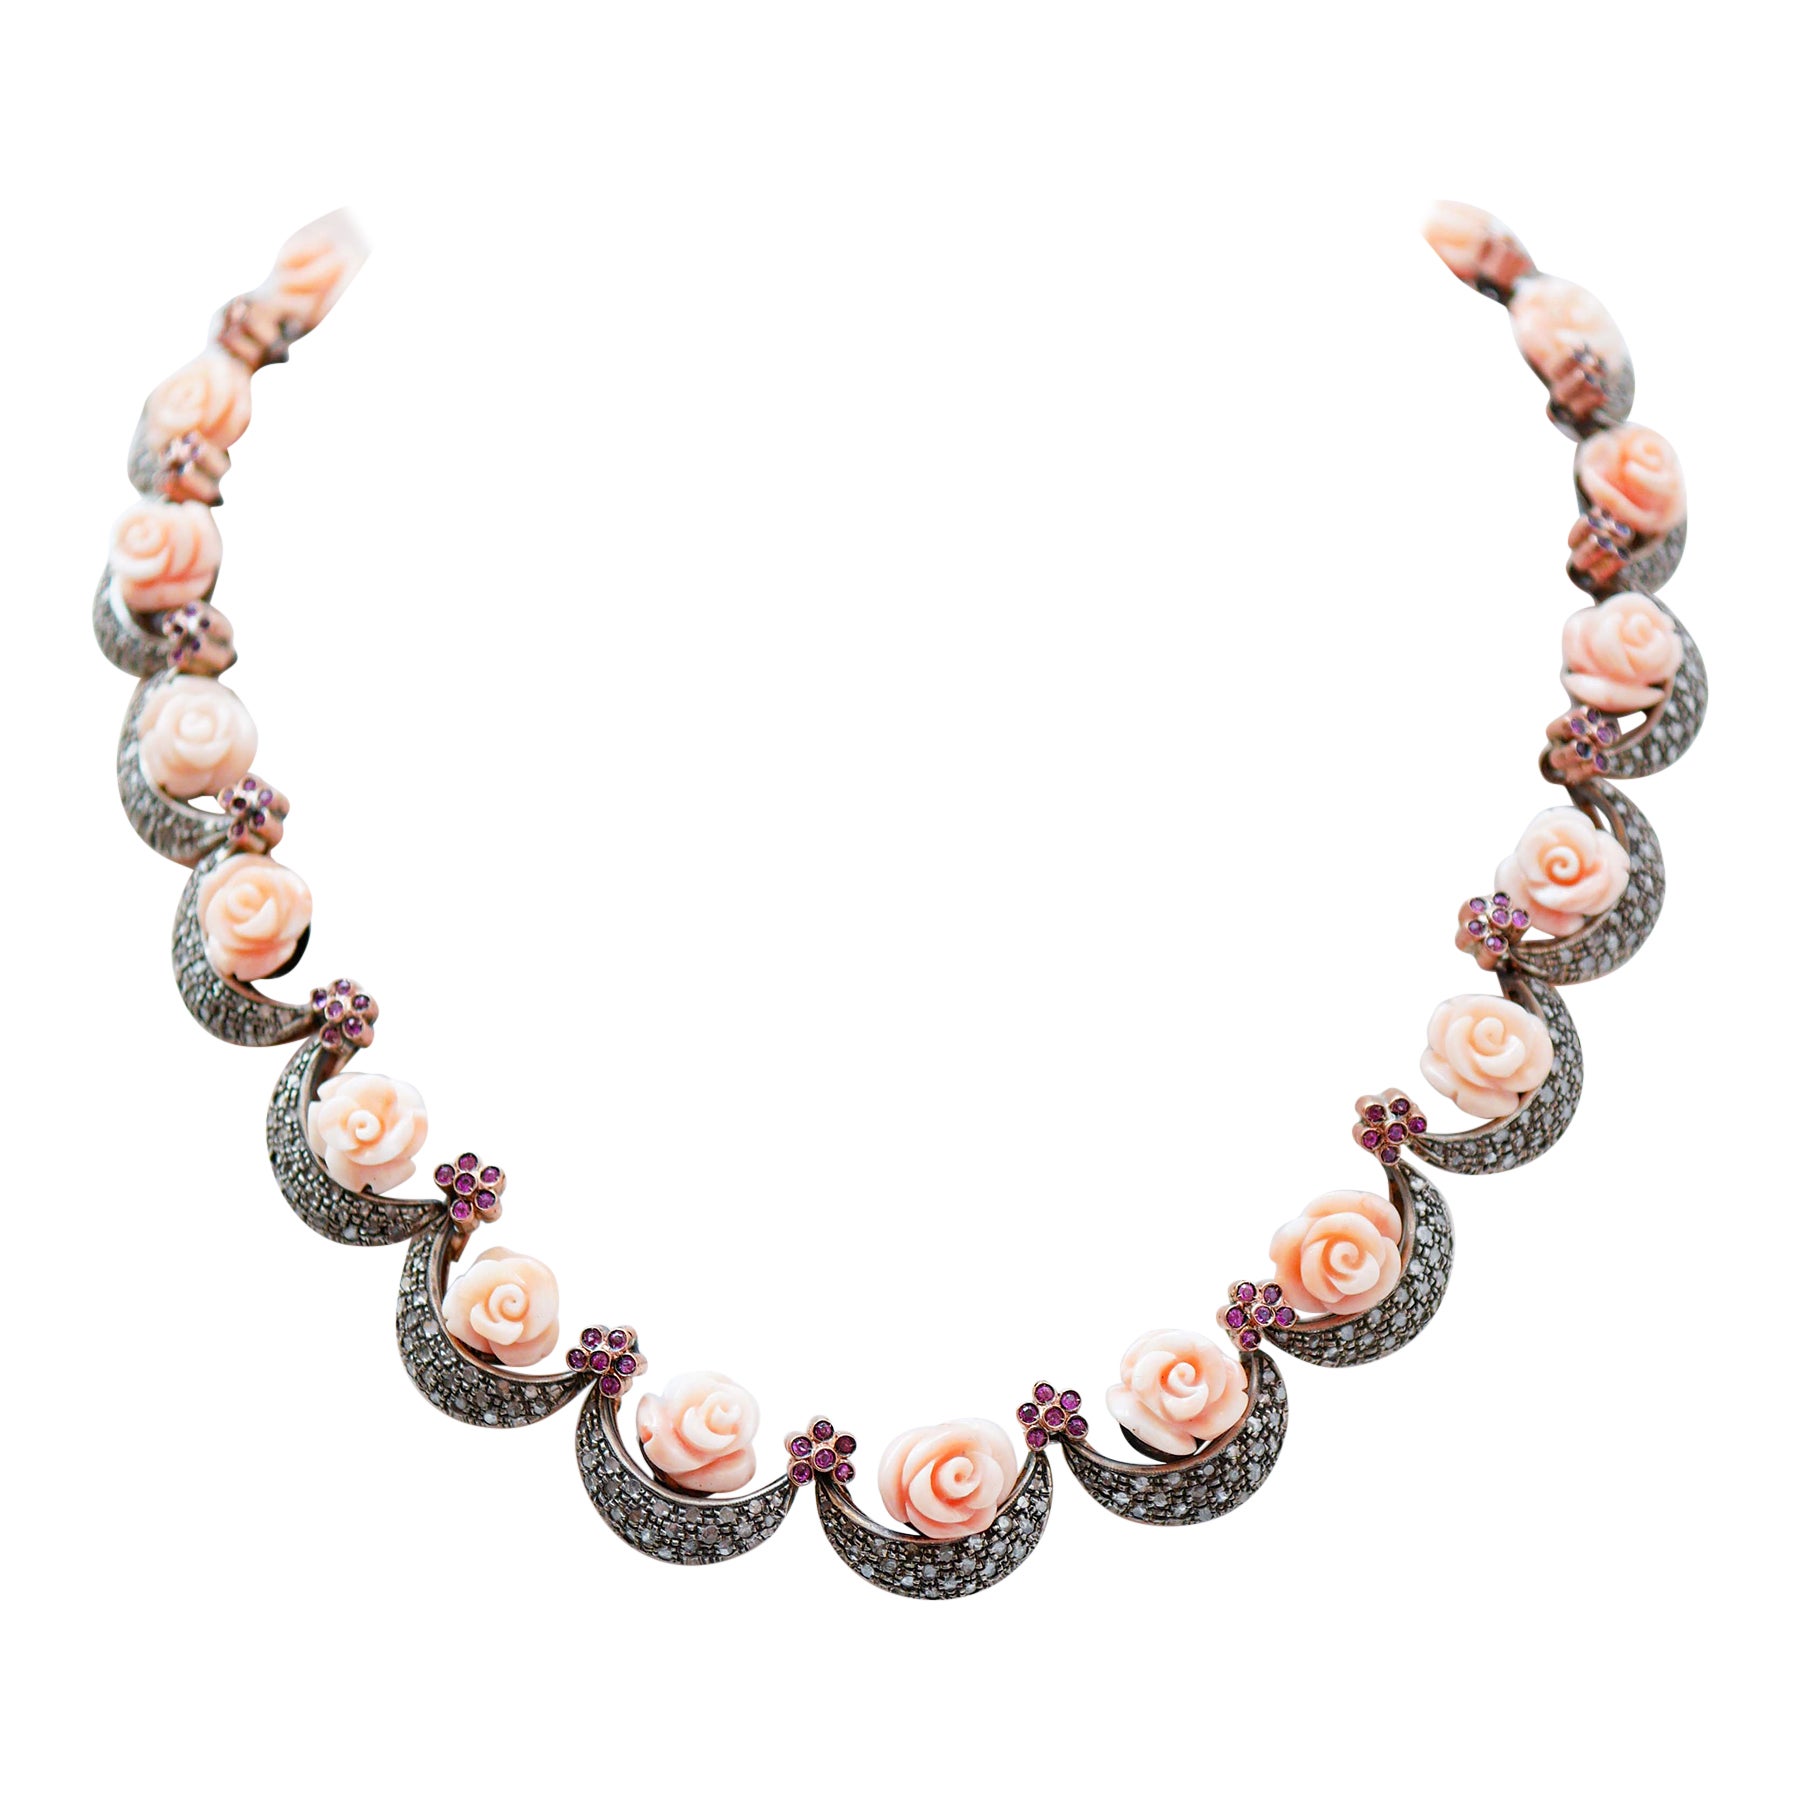 Pink Corals, Rubies, Diamonds, Rose Gold and Silver Retrò Necklace. For Sale